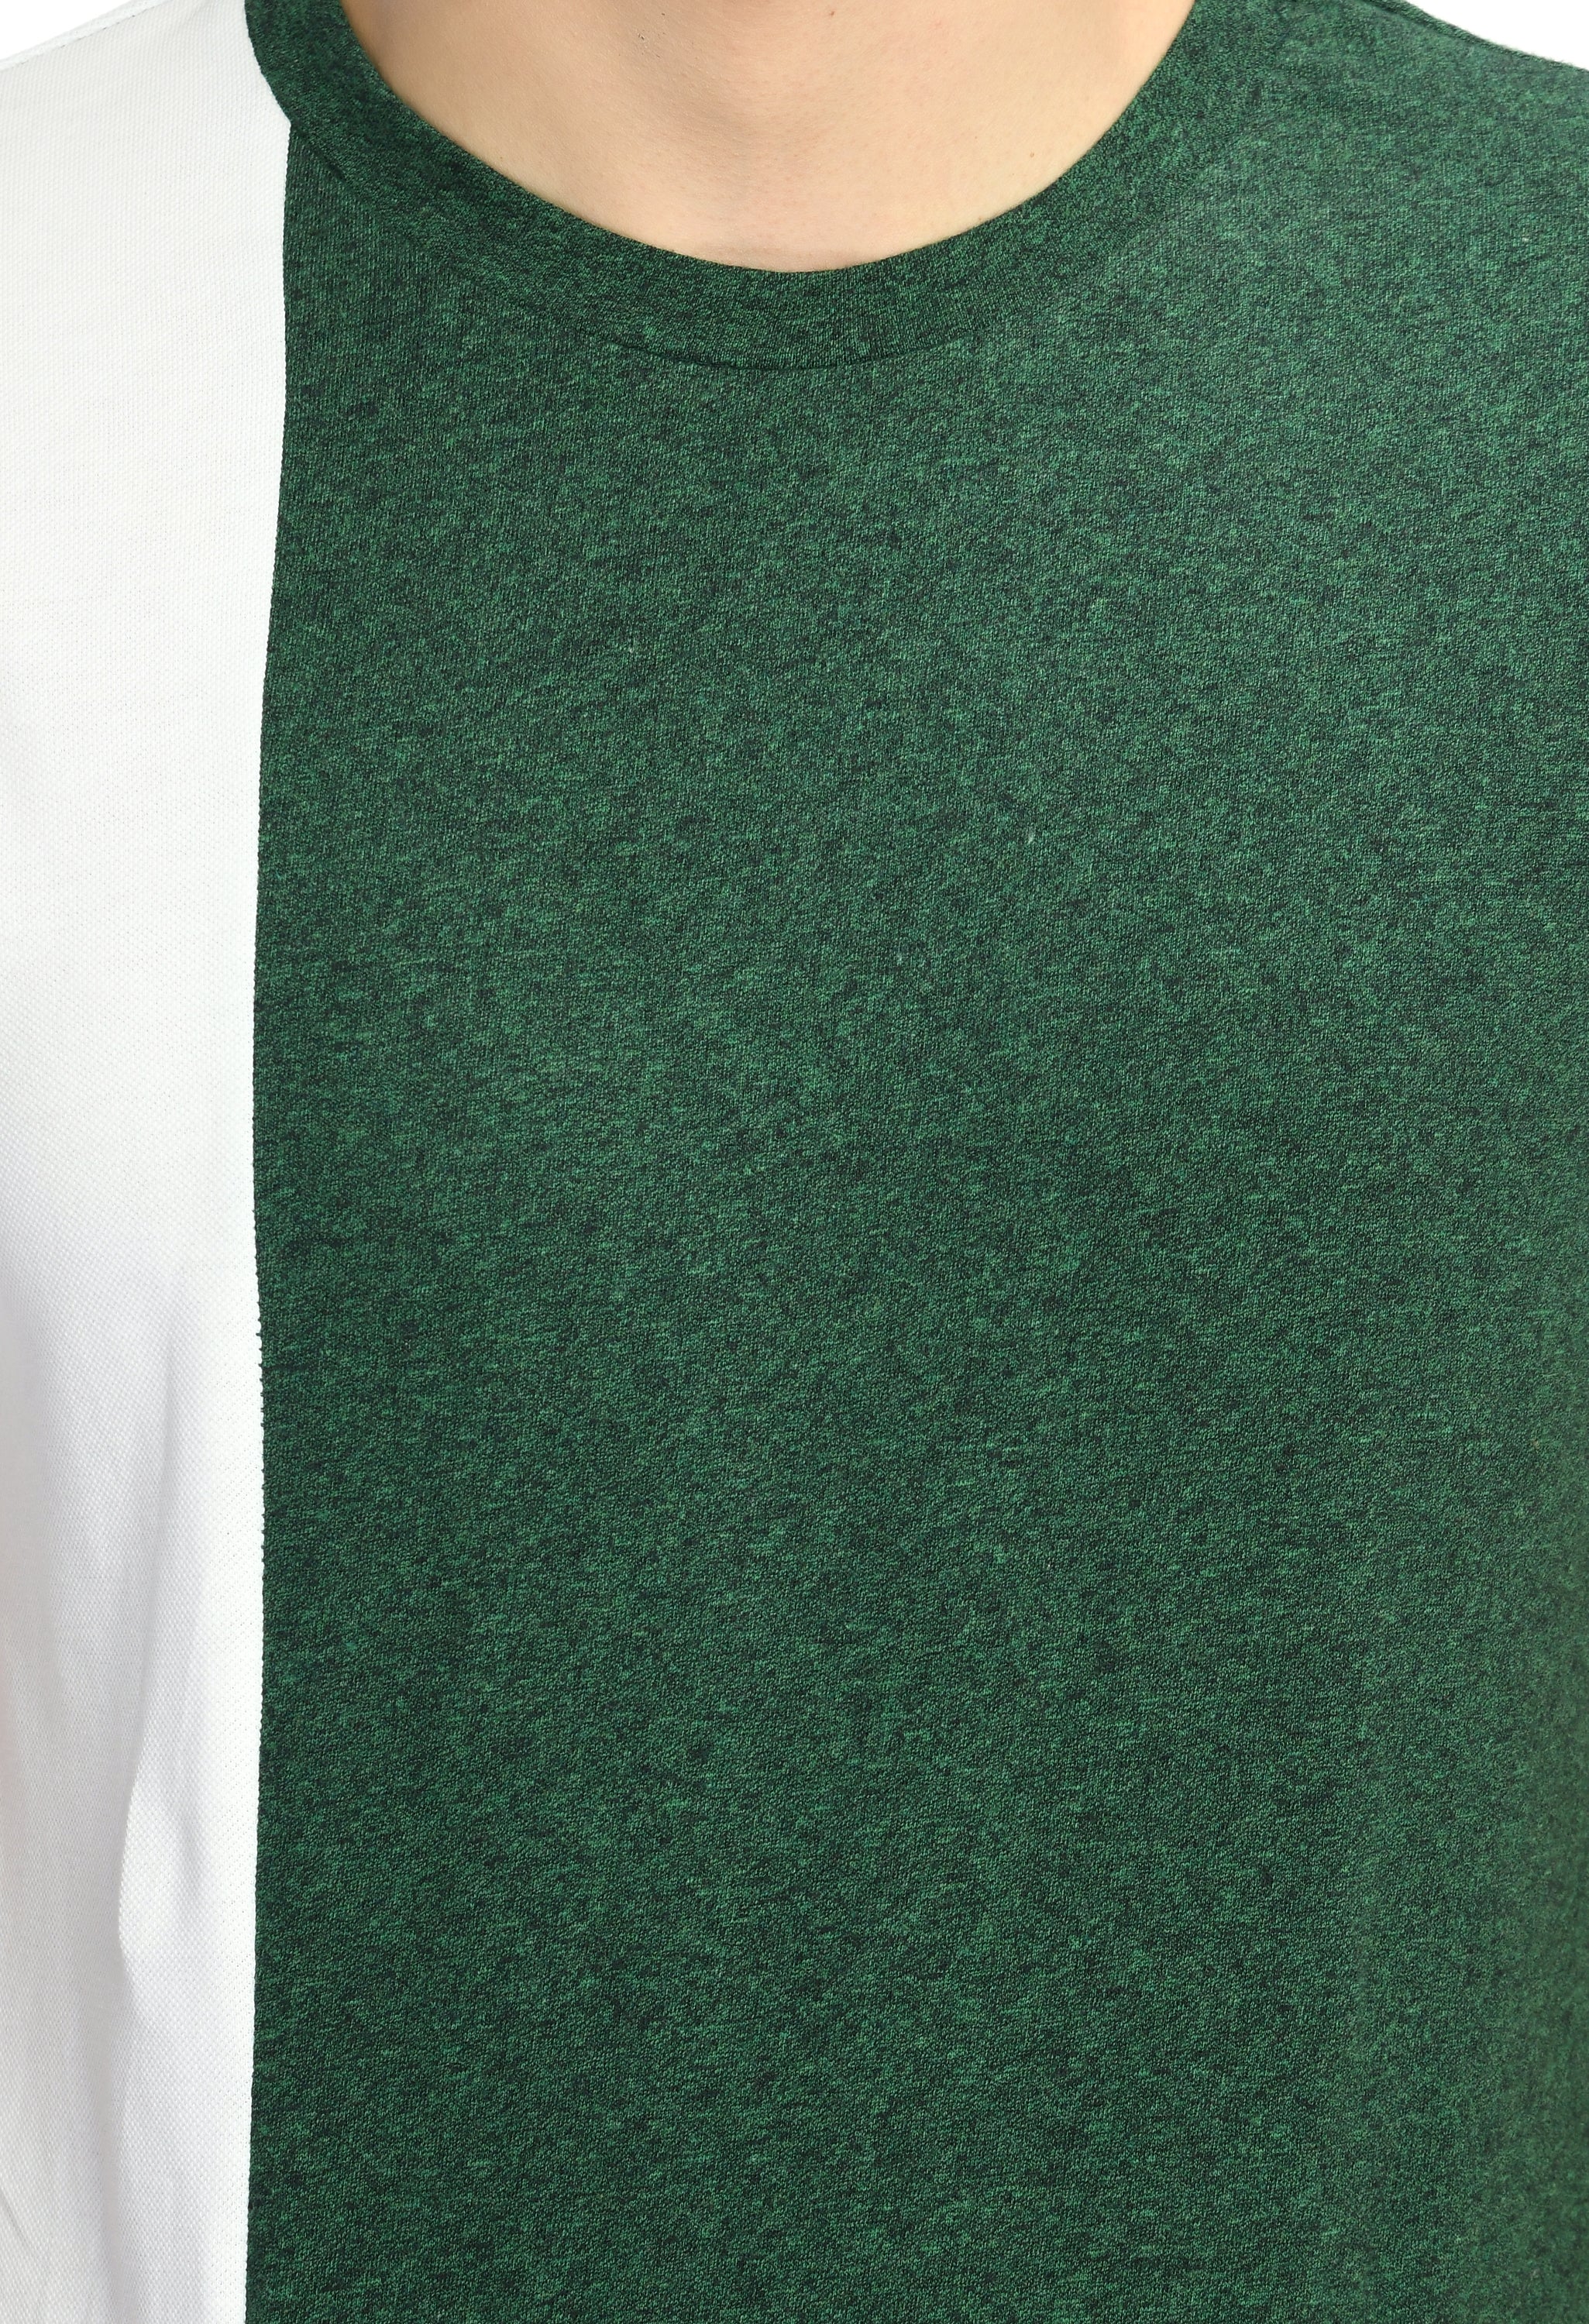 Color Blocked T-shirt (White & Green )